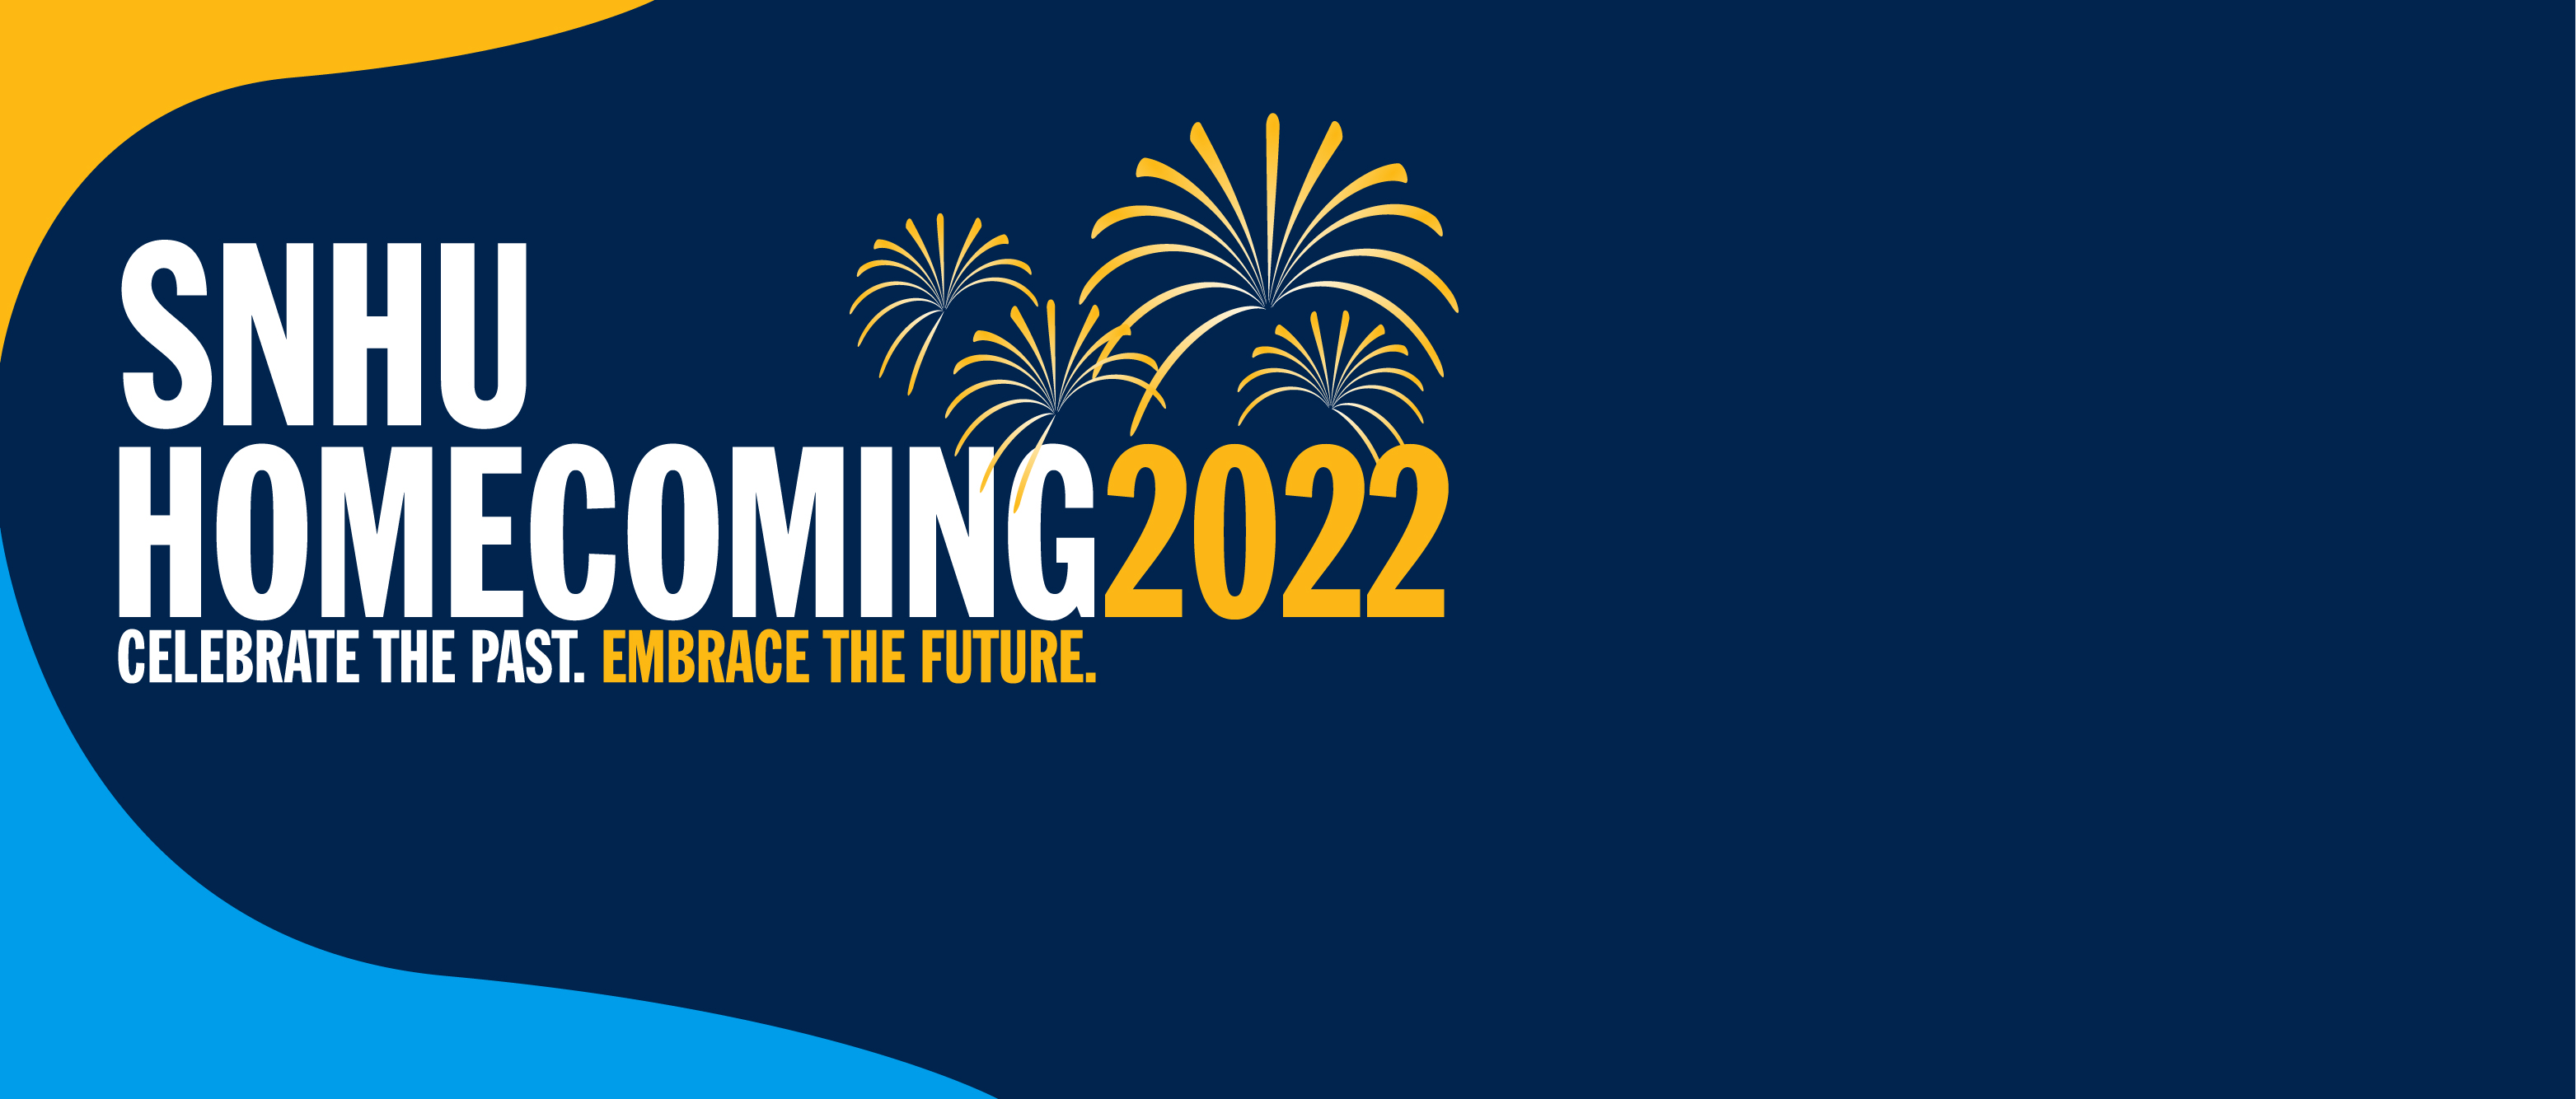 SNHU Homecoming 2022 | Celebrate the past. Embrace the future. 